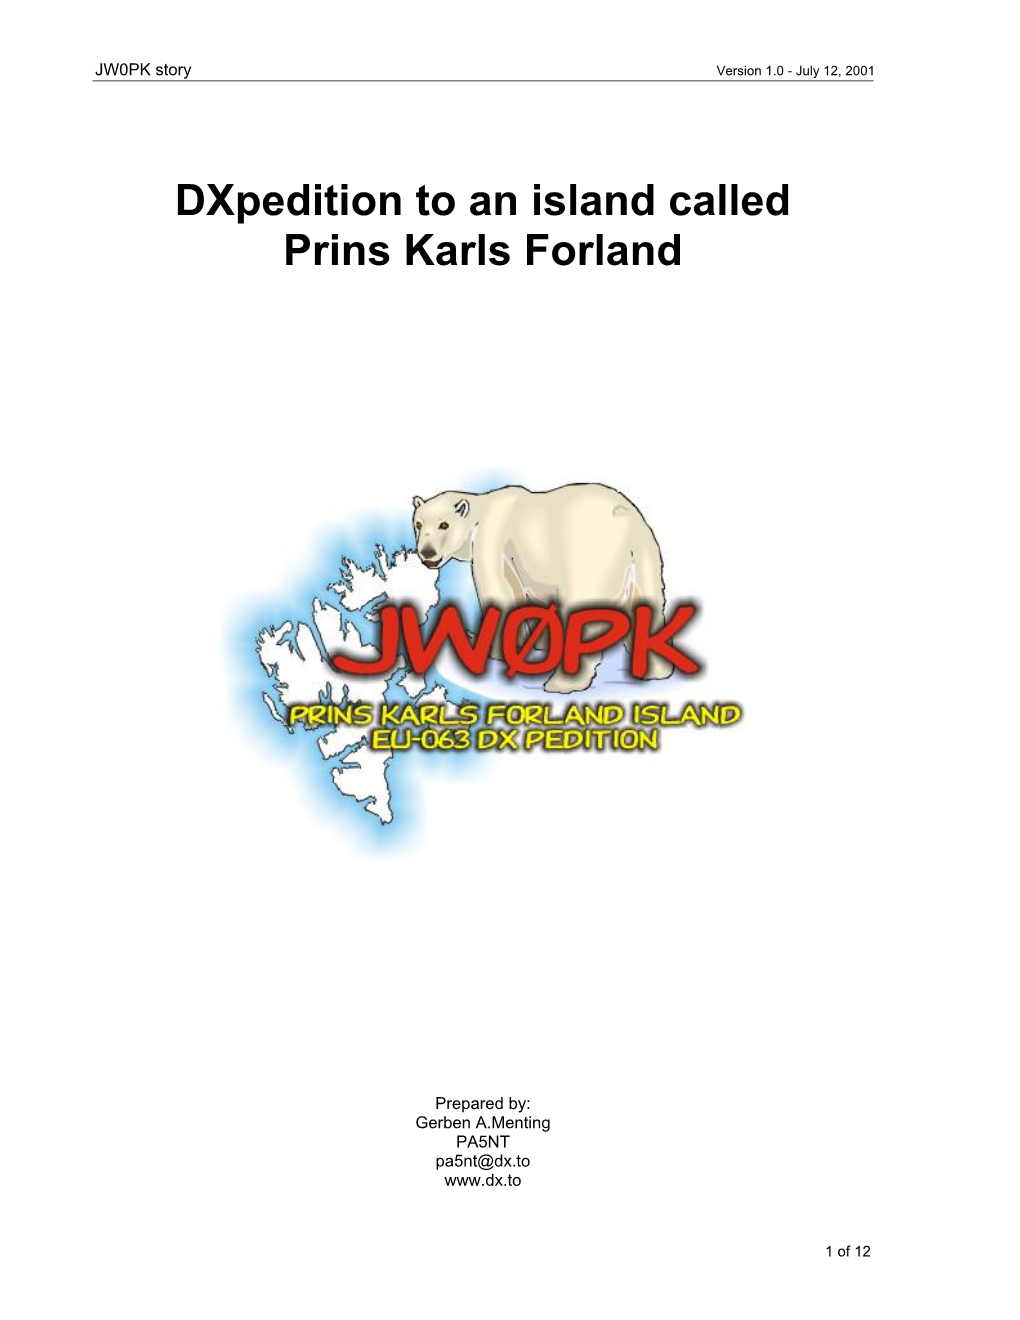 Story of the JW0PK Dxpedition to Prins Karls Forland, Svalbard